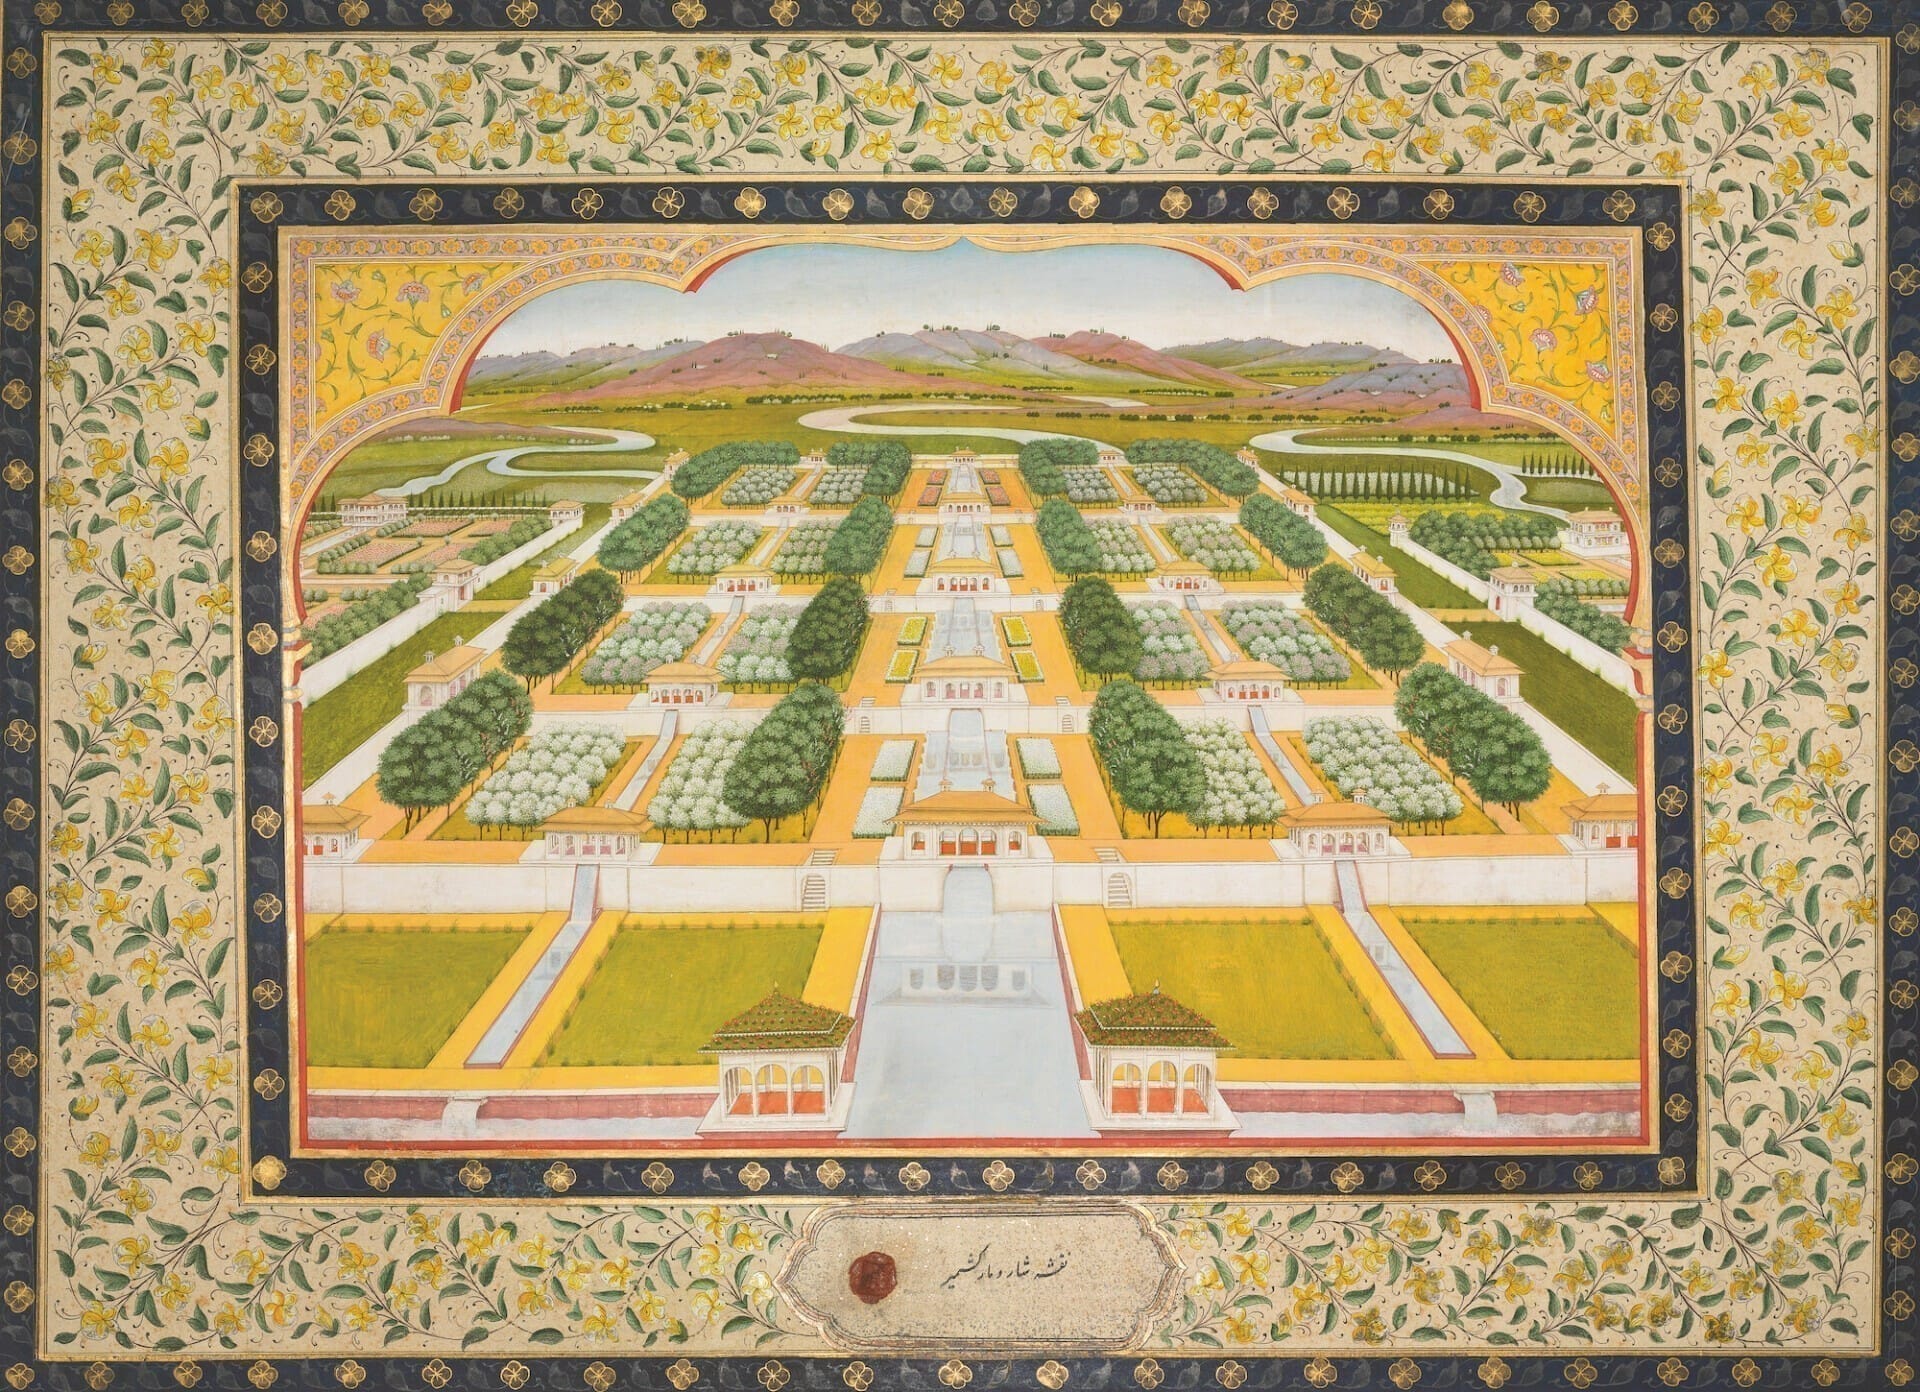 Hafiz Nurallah, “A View of Shalimar Bagh, Srinagar, from the Polier Album” (c.1780), opaque watercolor heightened with gold on paper, 9 ½ × 14 ½ inches. Image courtesy of Sotheby’s